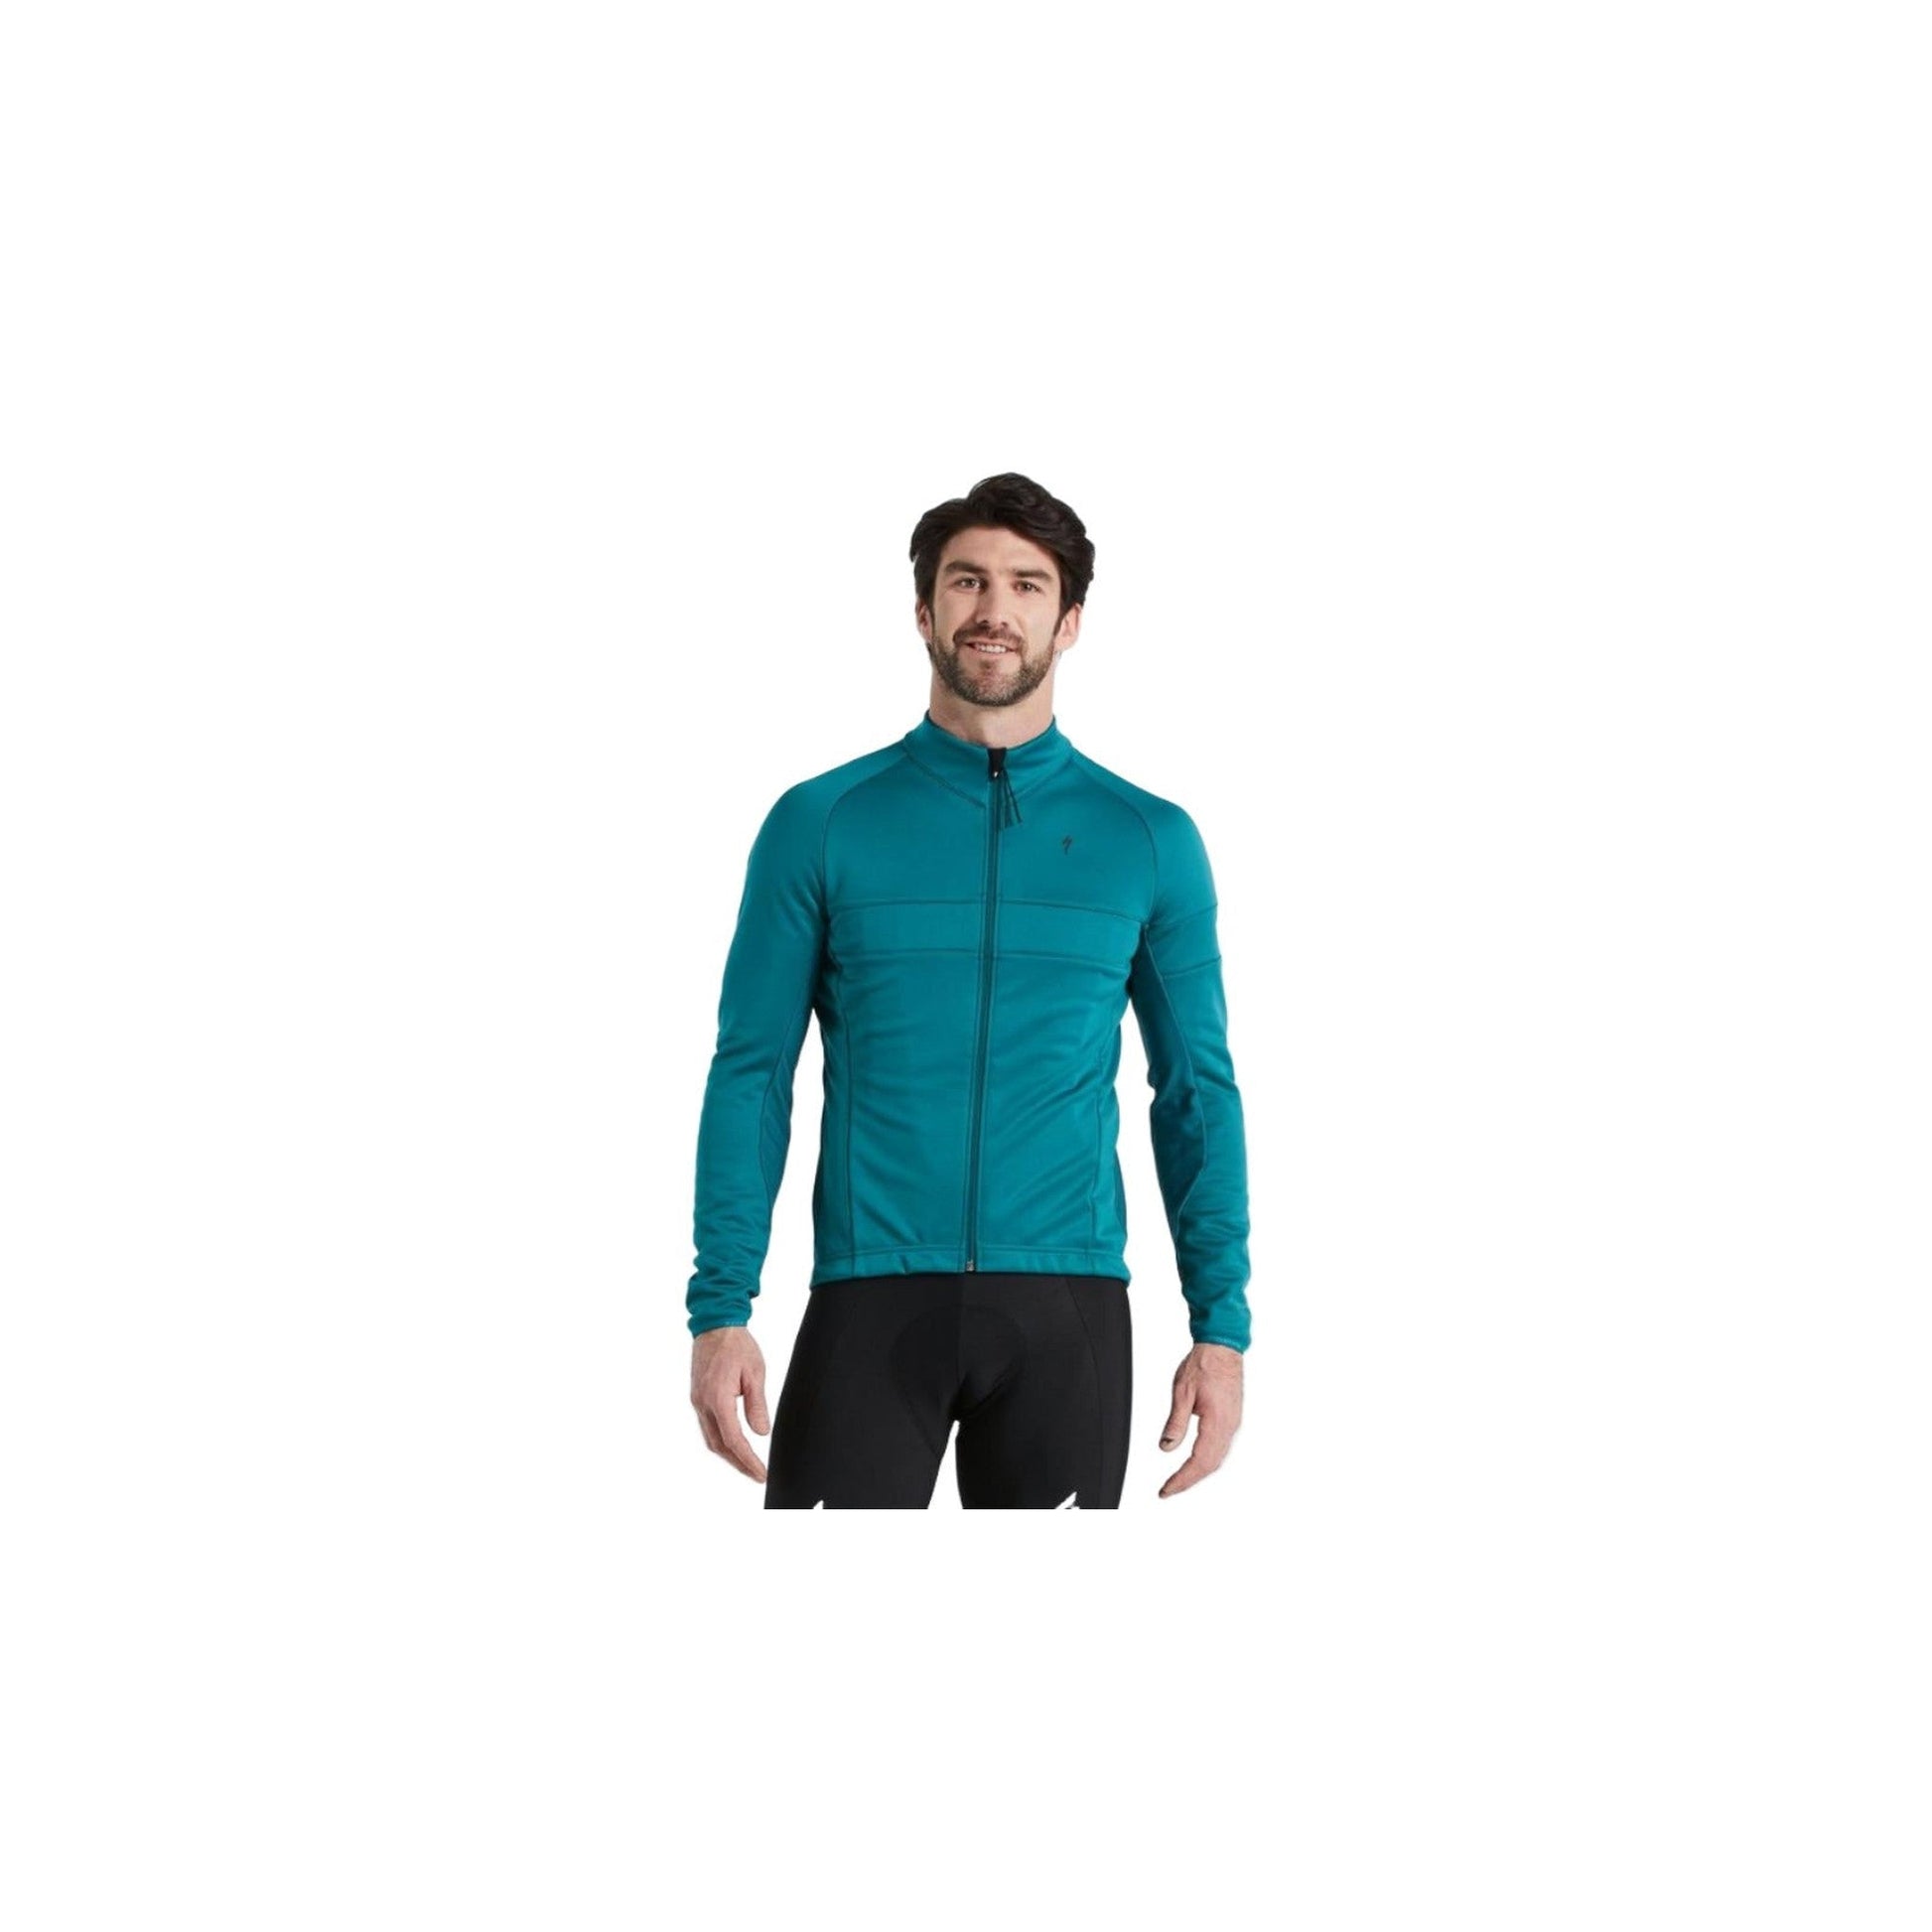 Men's RBX Softshell Jacket | Complete Cyclist - While finding the perfect jacket at either end of the temperature spectrum is pretty easy, the temperature range in between is where you'll spend the majority of your time on the road—and that's where the RBX Softshell Jacket shines. It's stretchy, wind- and water-resistant, and is sure to keep you warm in the shoulder season.